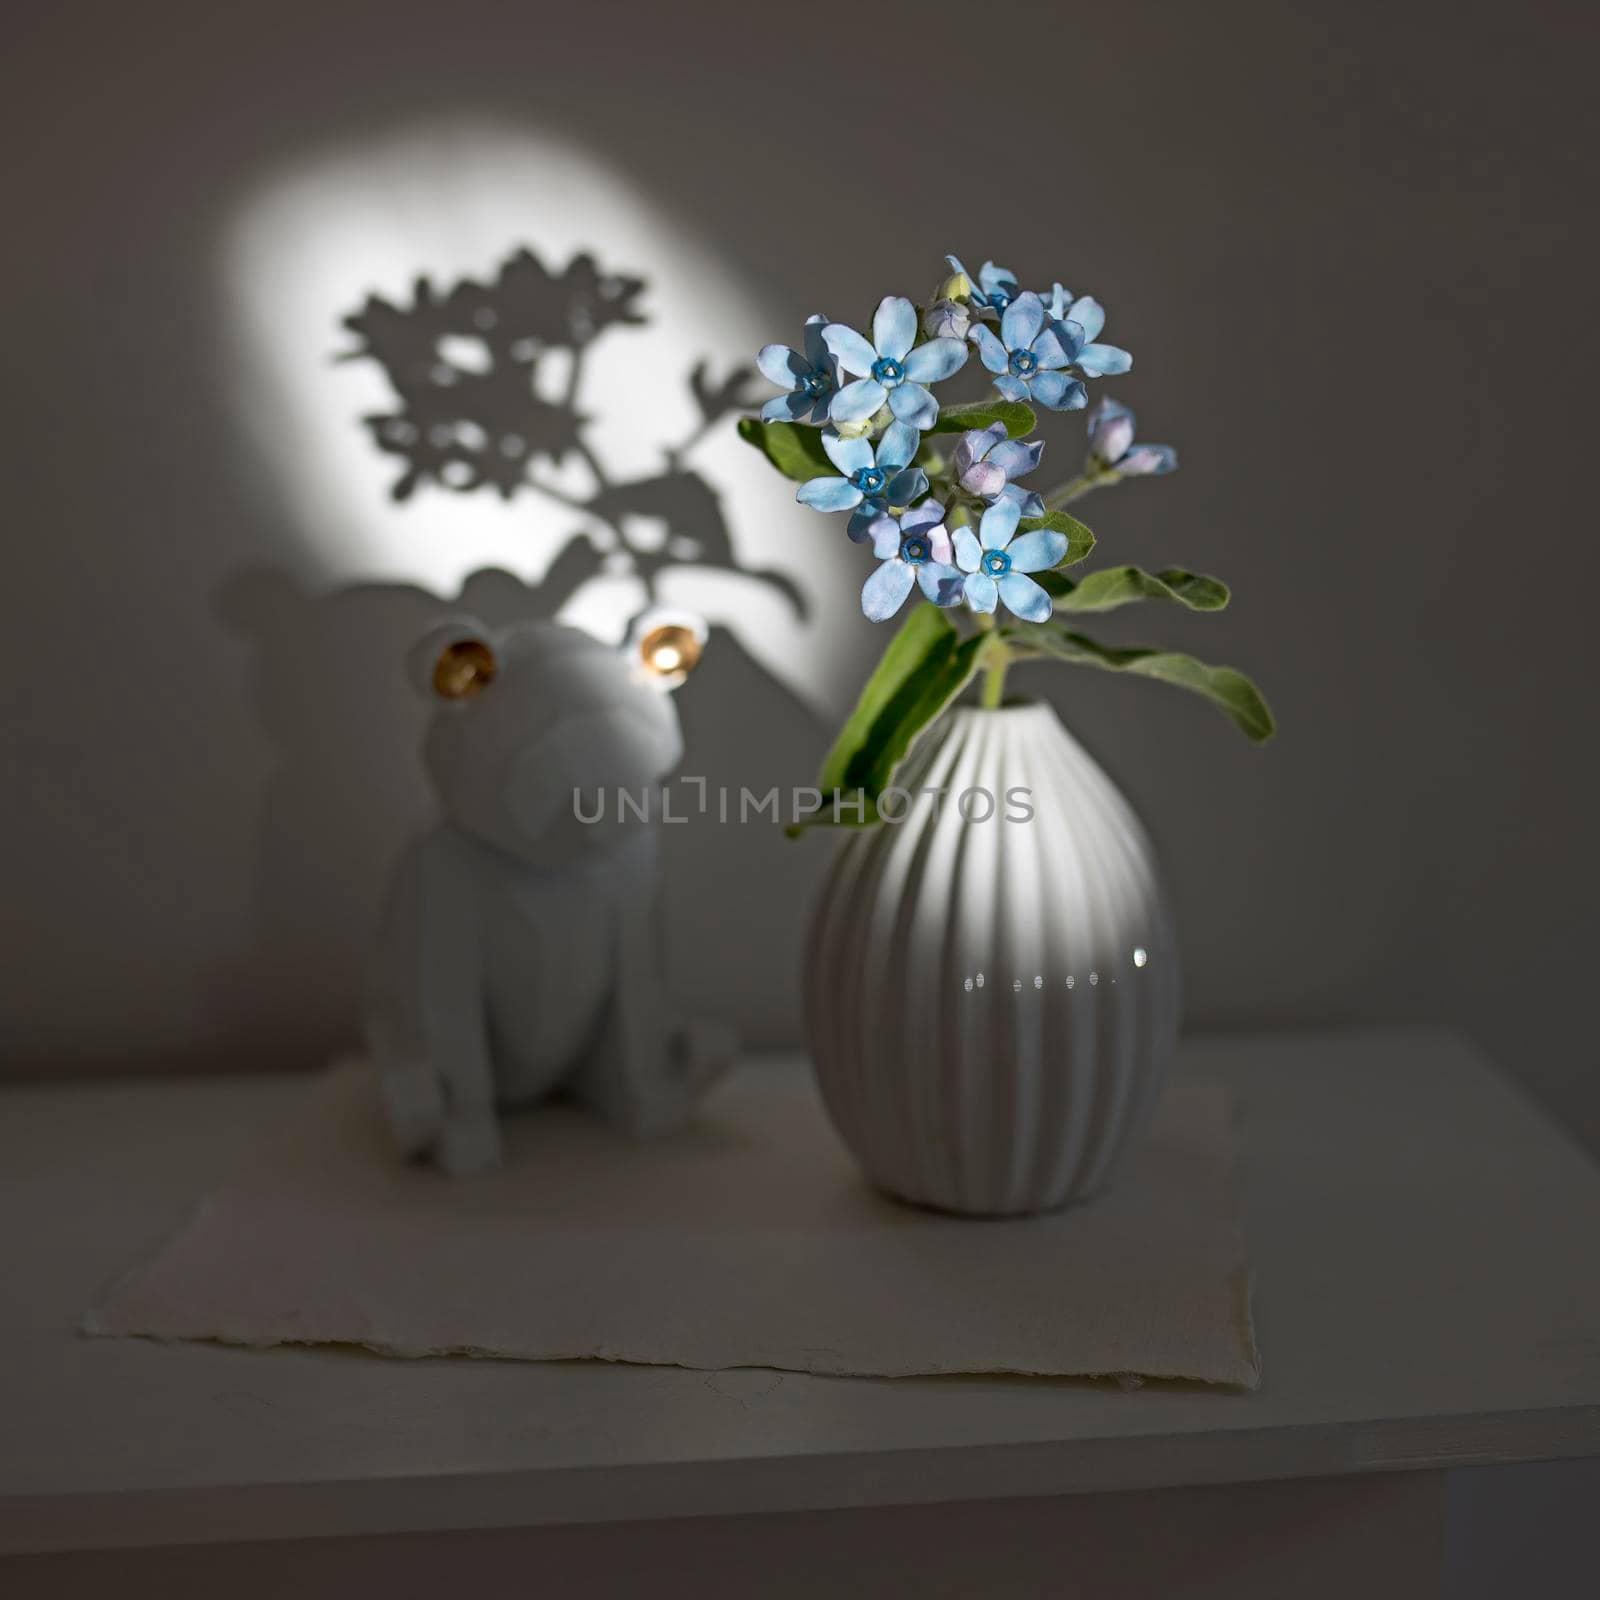 Flower hackelia velutina in a white fluted vase in the style of the seventies, a figurine of fox. Scandinavian style. Shadow